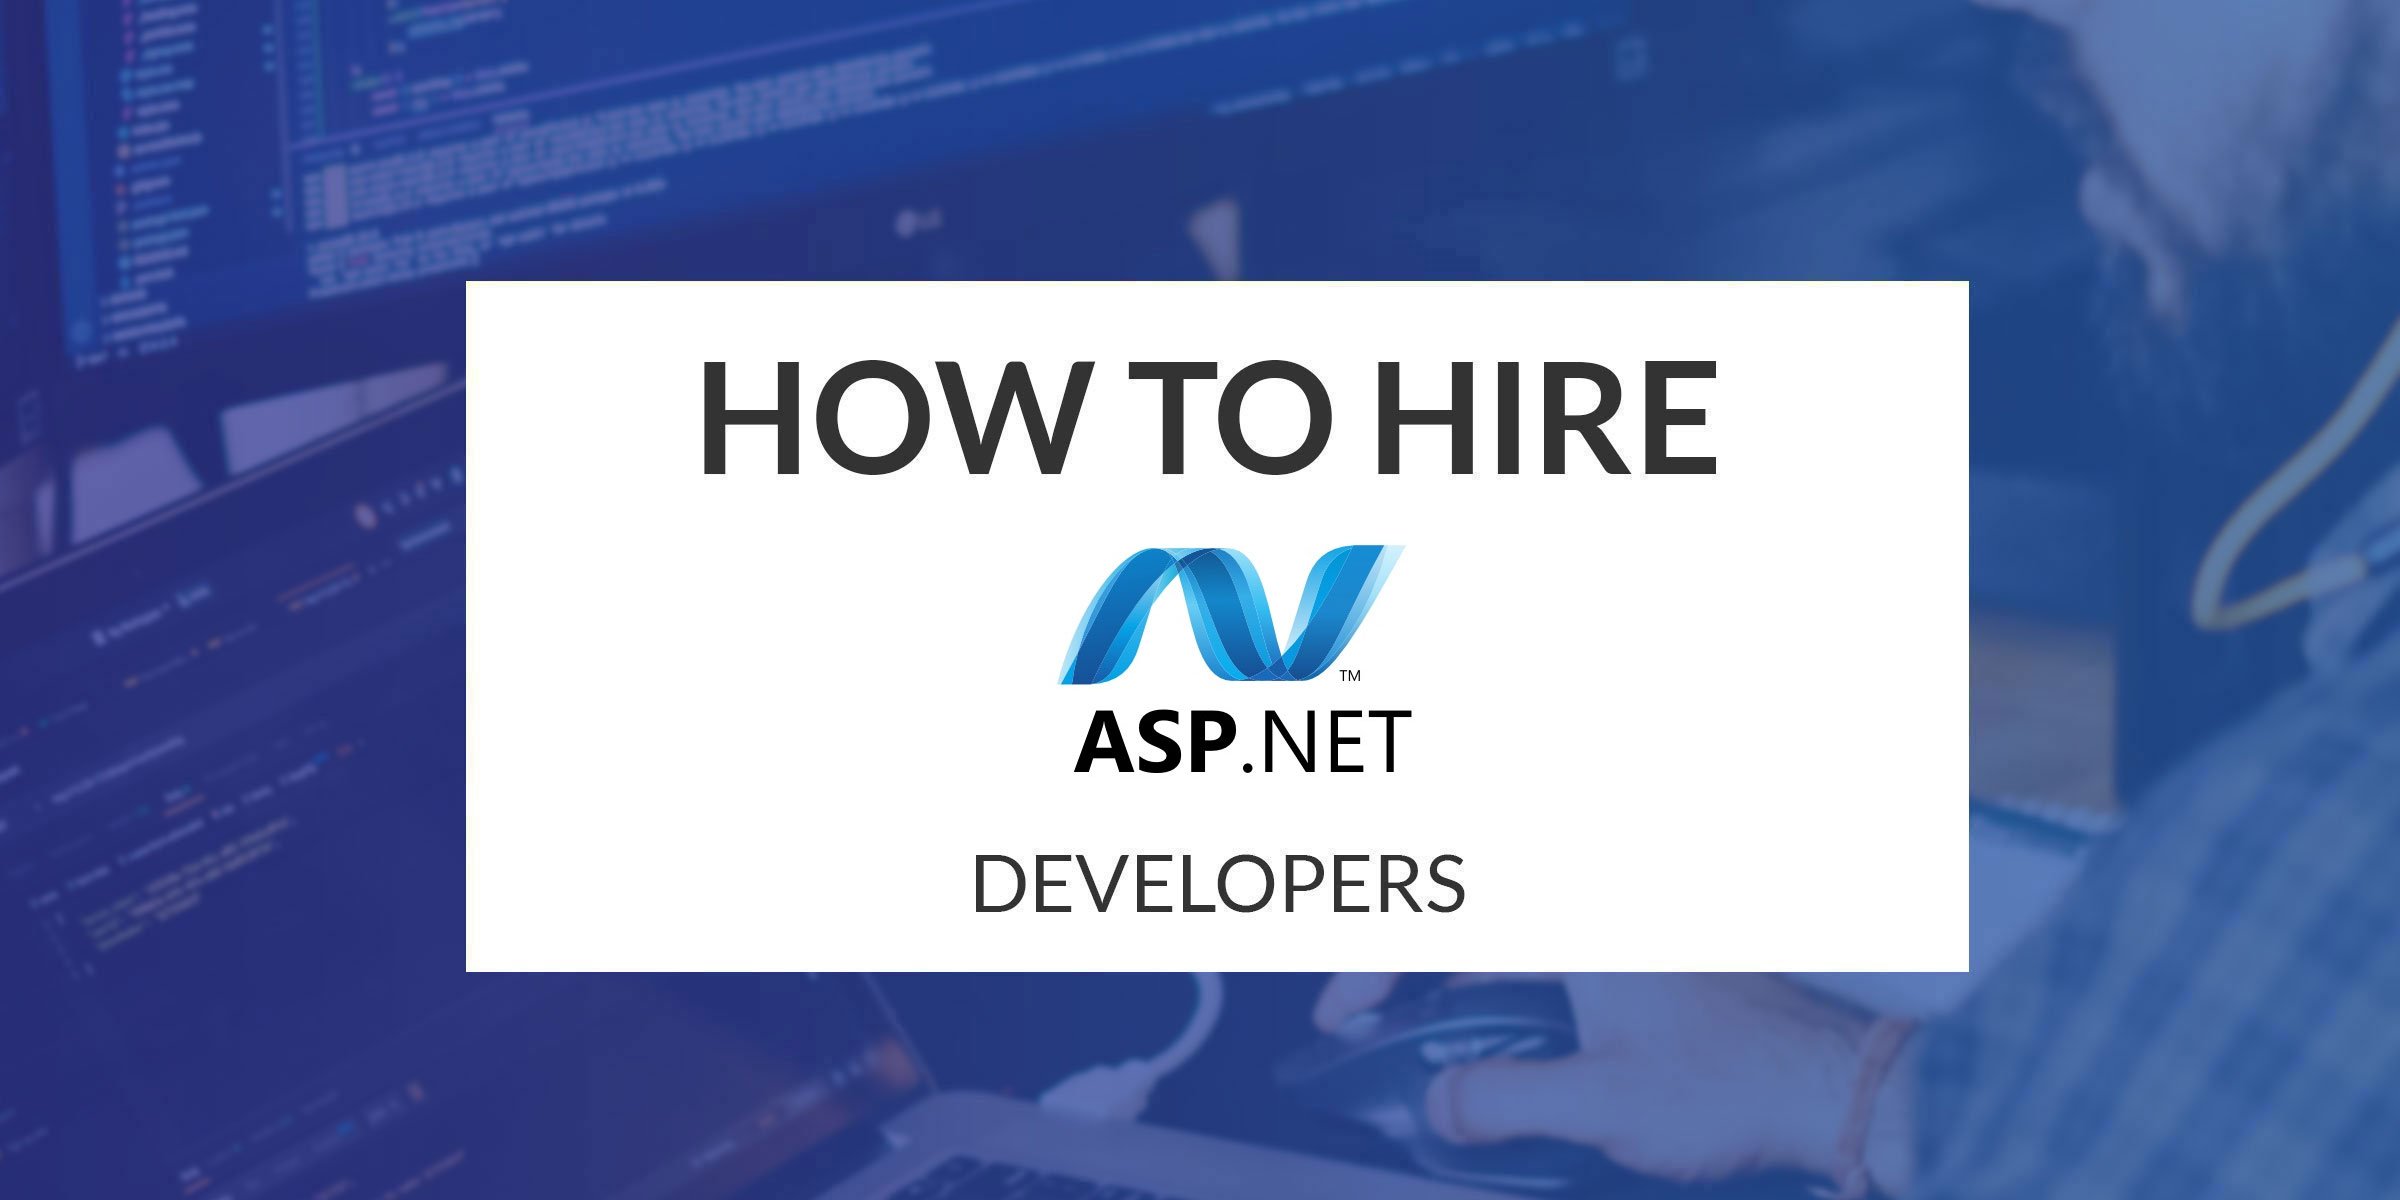 How to Hire ASP.NET Developers